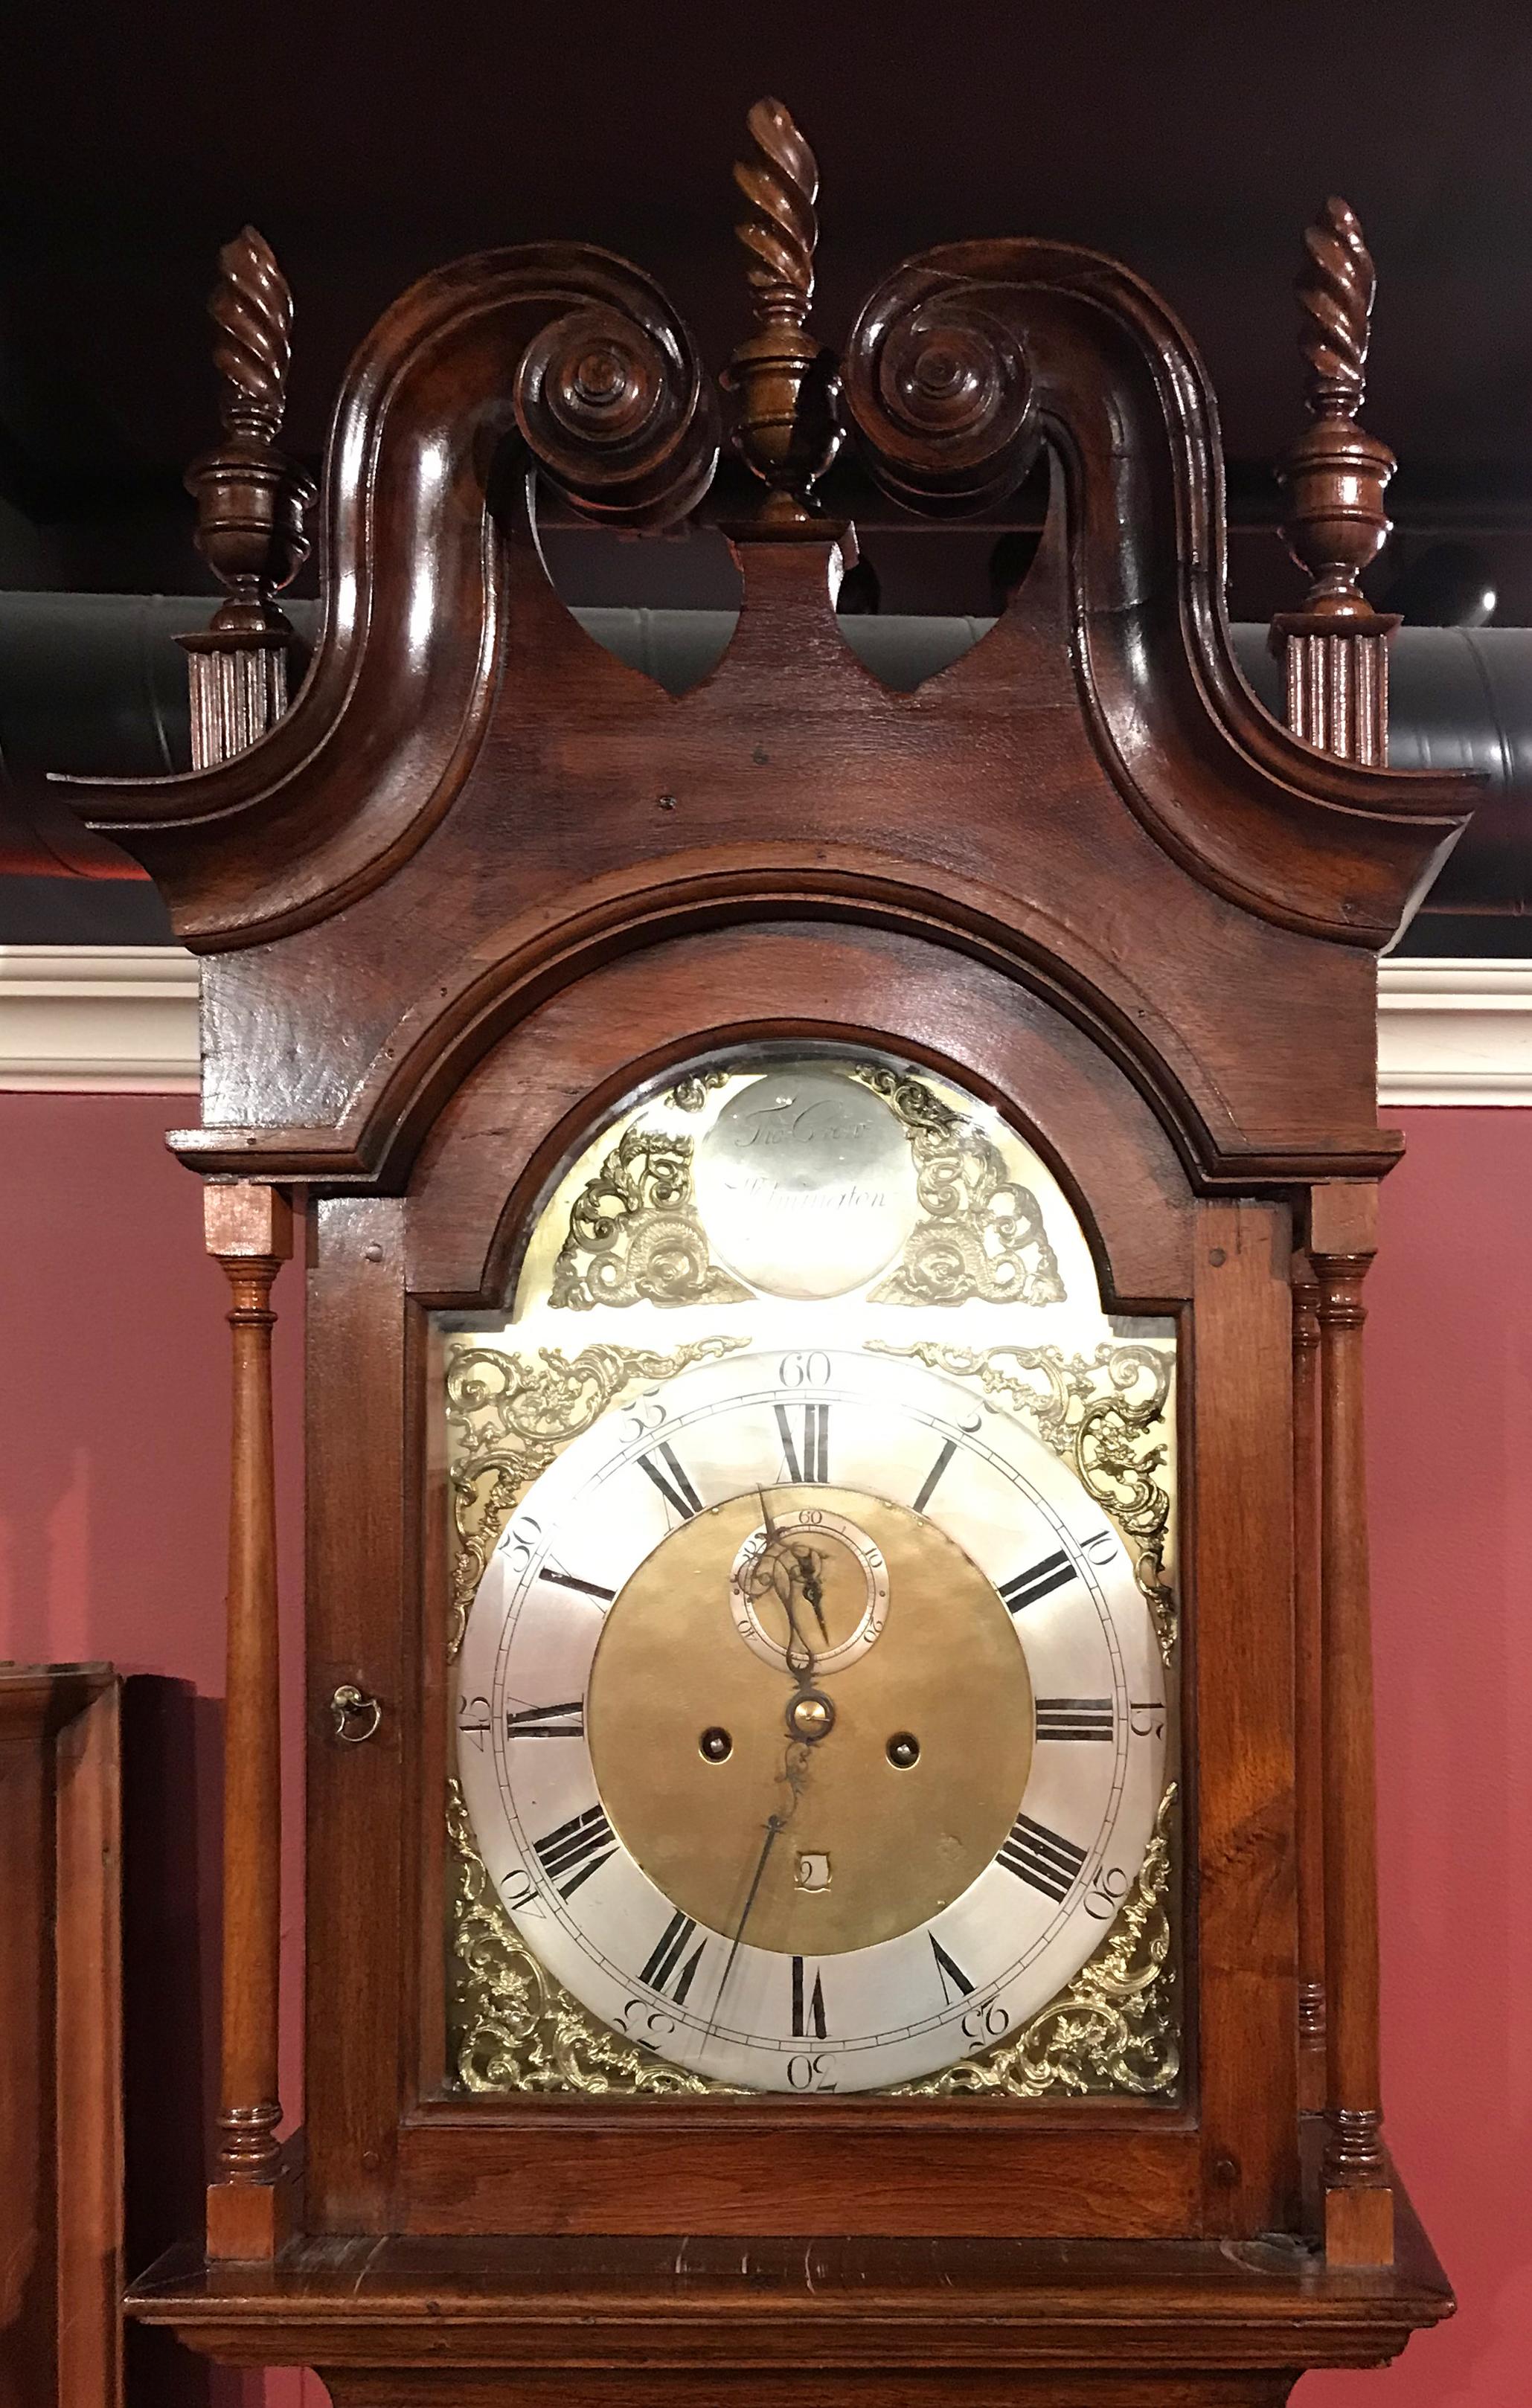 A fine mahogany tall case clock with carved swan neck broken pediment featuring three spiral form finials, its bonnet with a tombstone shaped glass door opening to a brass Roman numeral dial above which is inscribed “Tho. Crow, Wilmington,” pierced